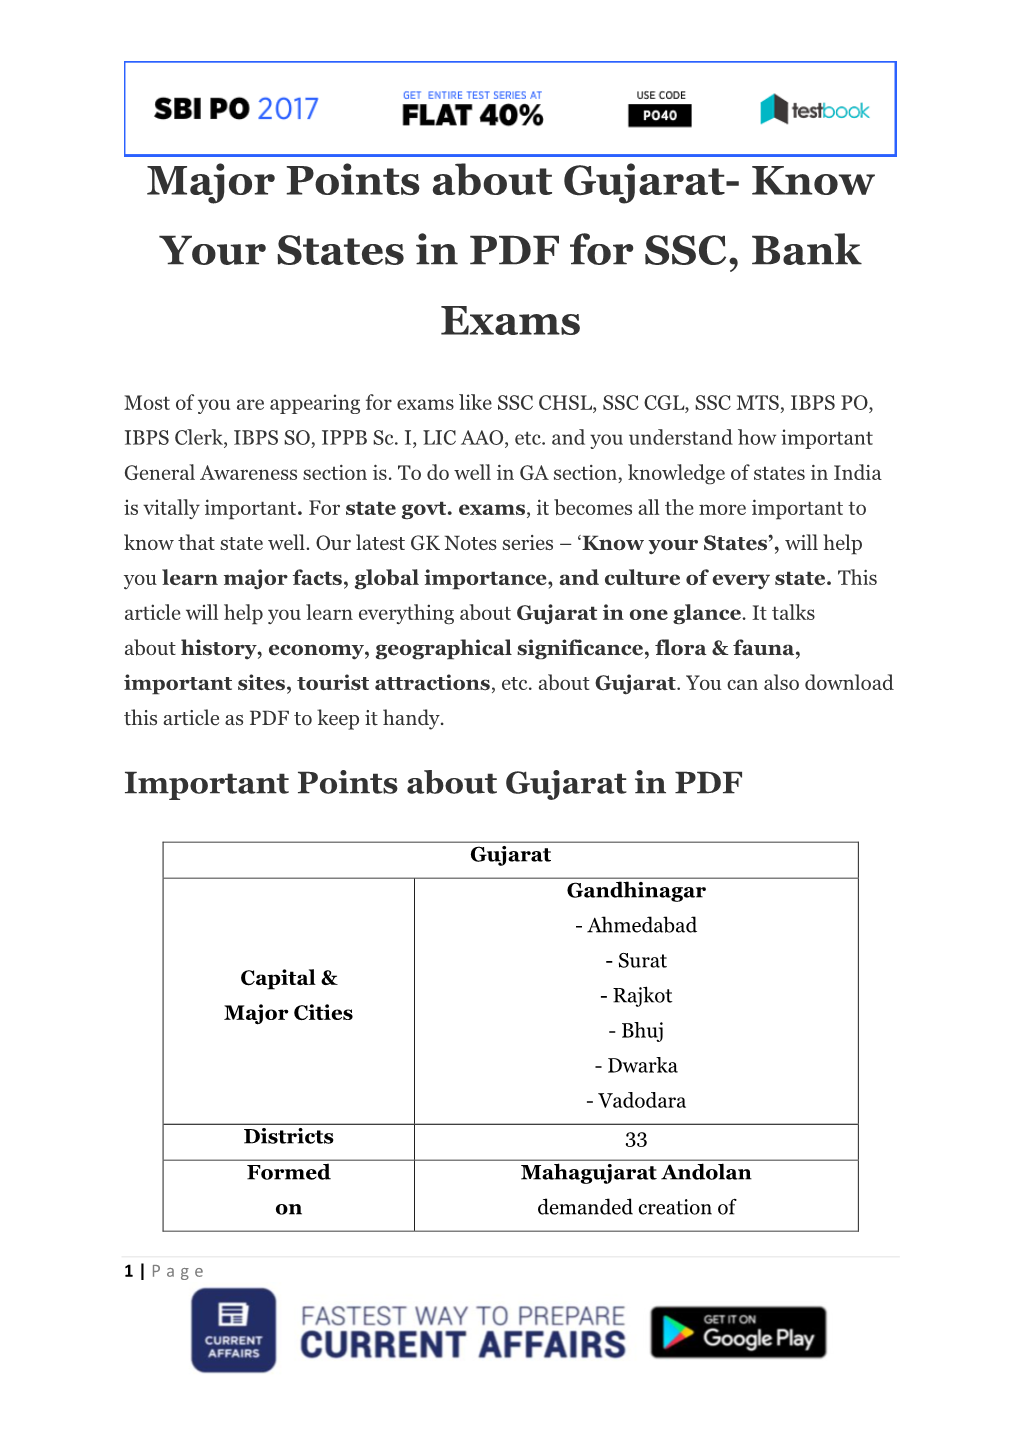 Major Points About Gujarat- Know Your States in PDF for SSC, Bank Exams